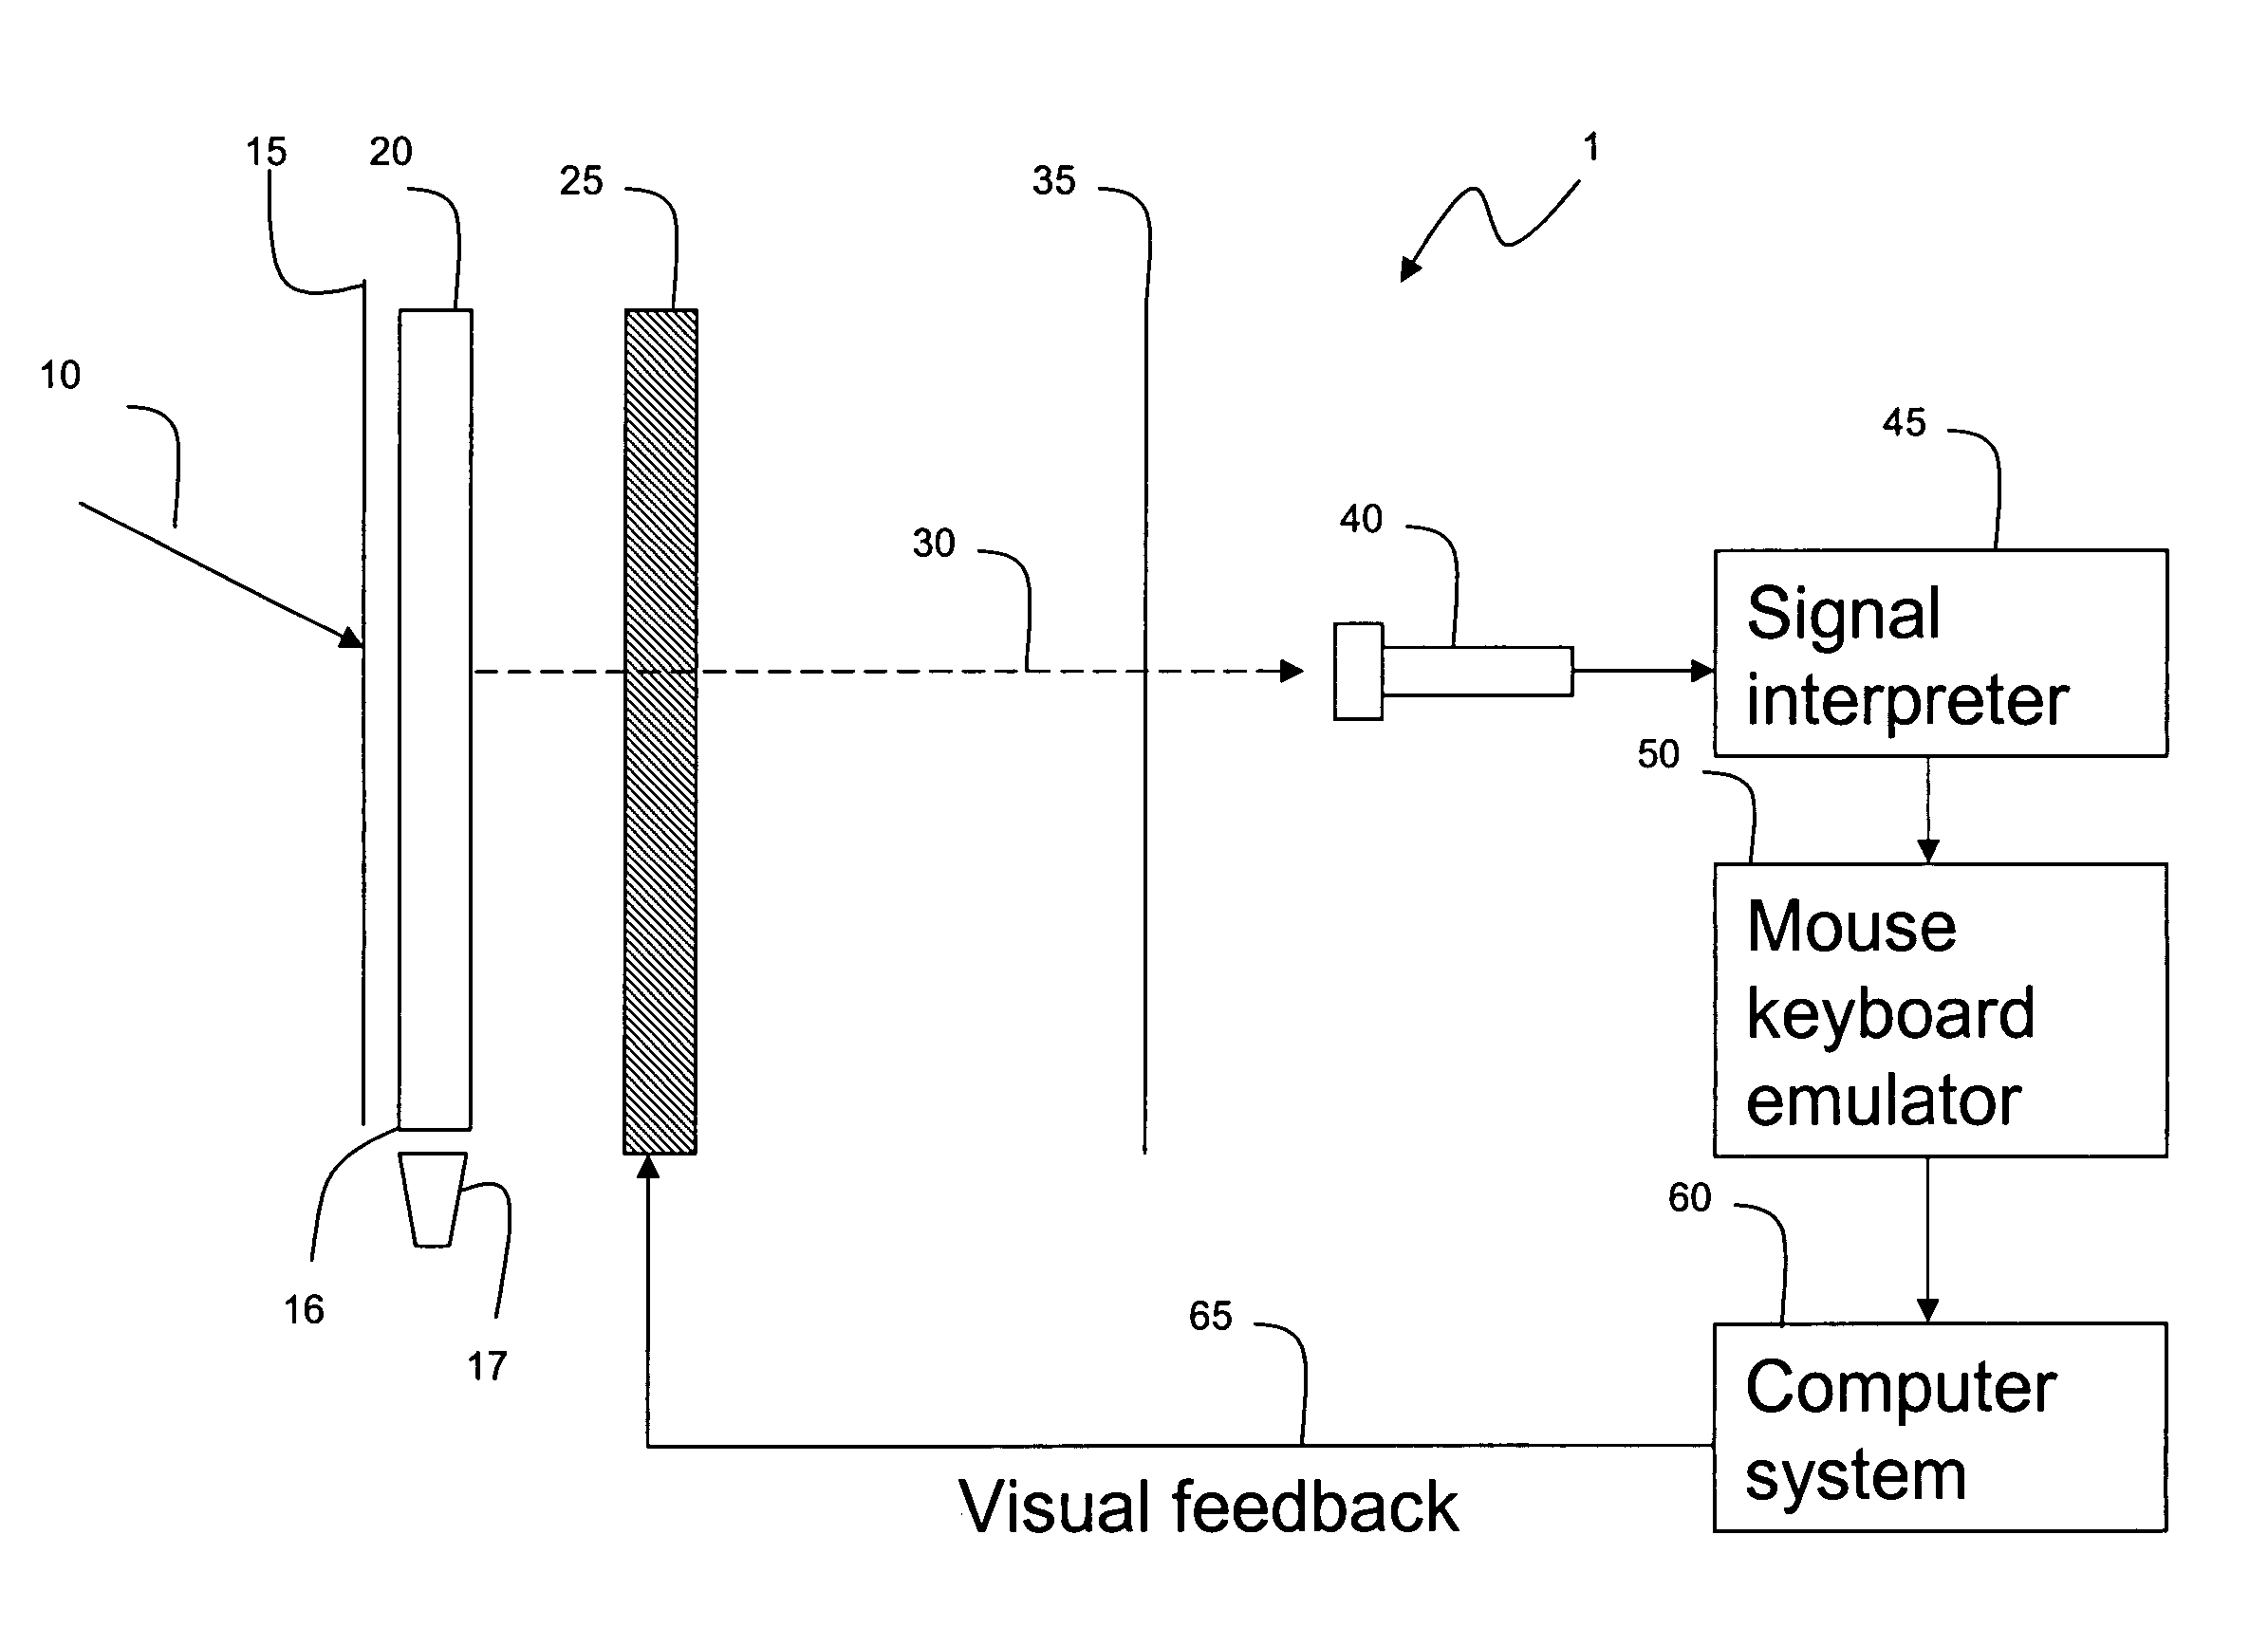 Photonic touch screen apparatus and method of use